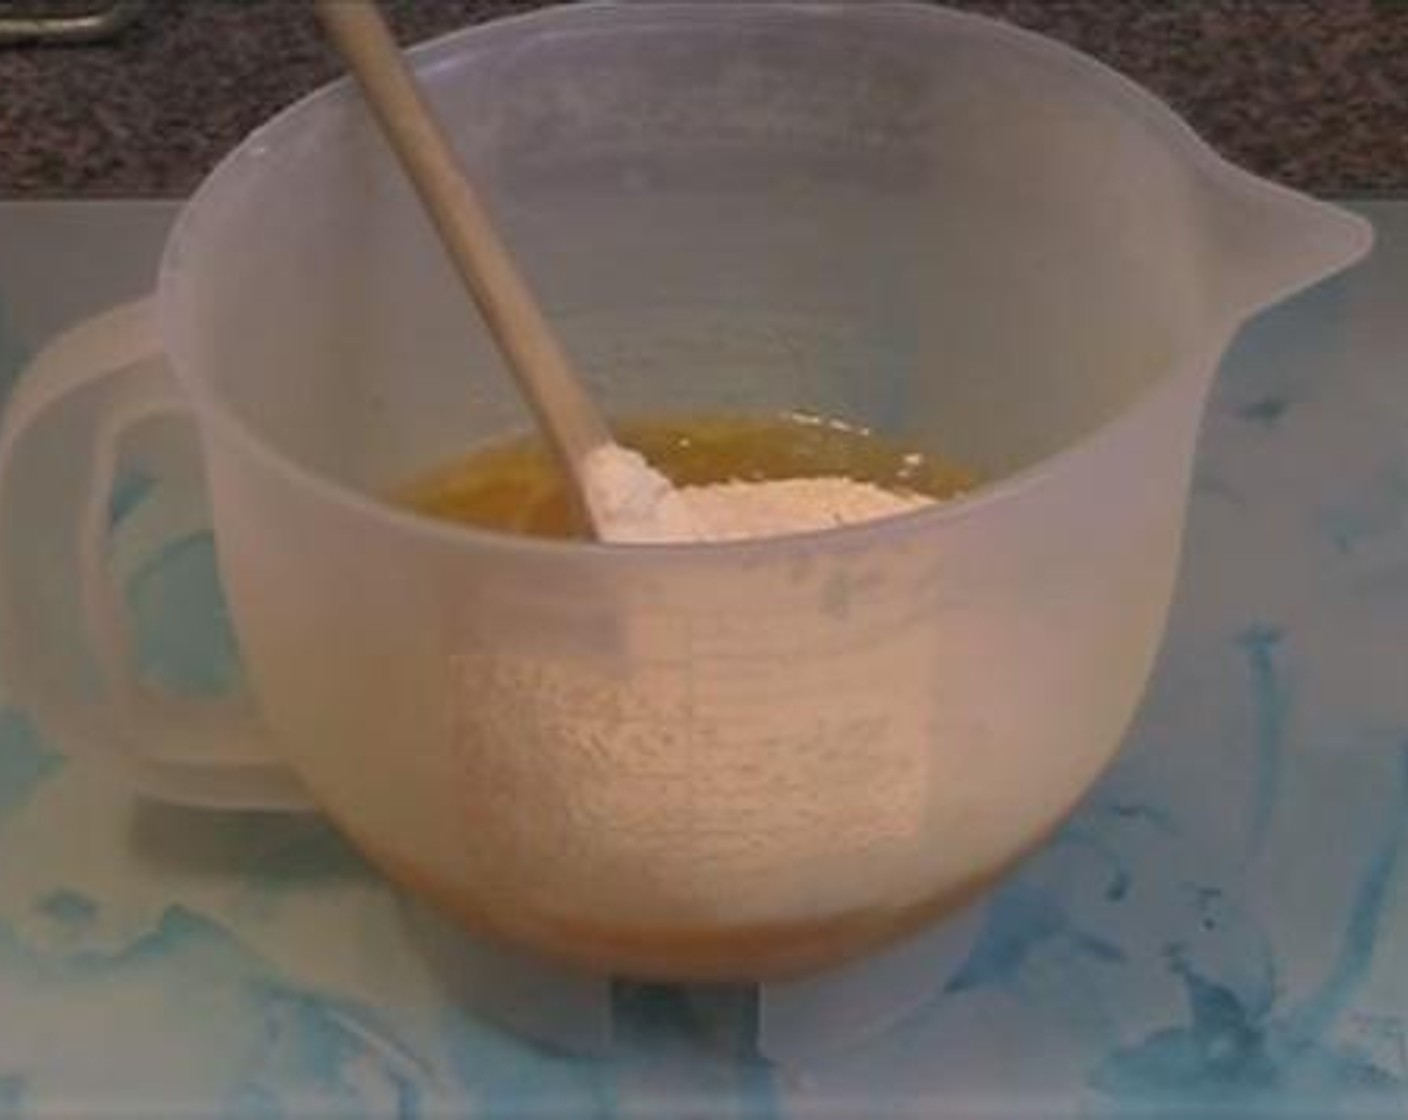 step 2 Add in the Self-Rising Flour (1/2 cup), and the juice from Lemons (2 1/2) and mix everything together. Also add the Milk (1/3 cup) a little bit at a time while whisking.